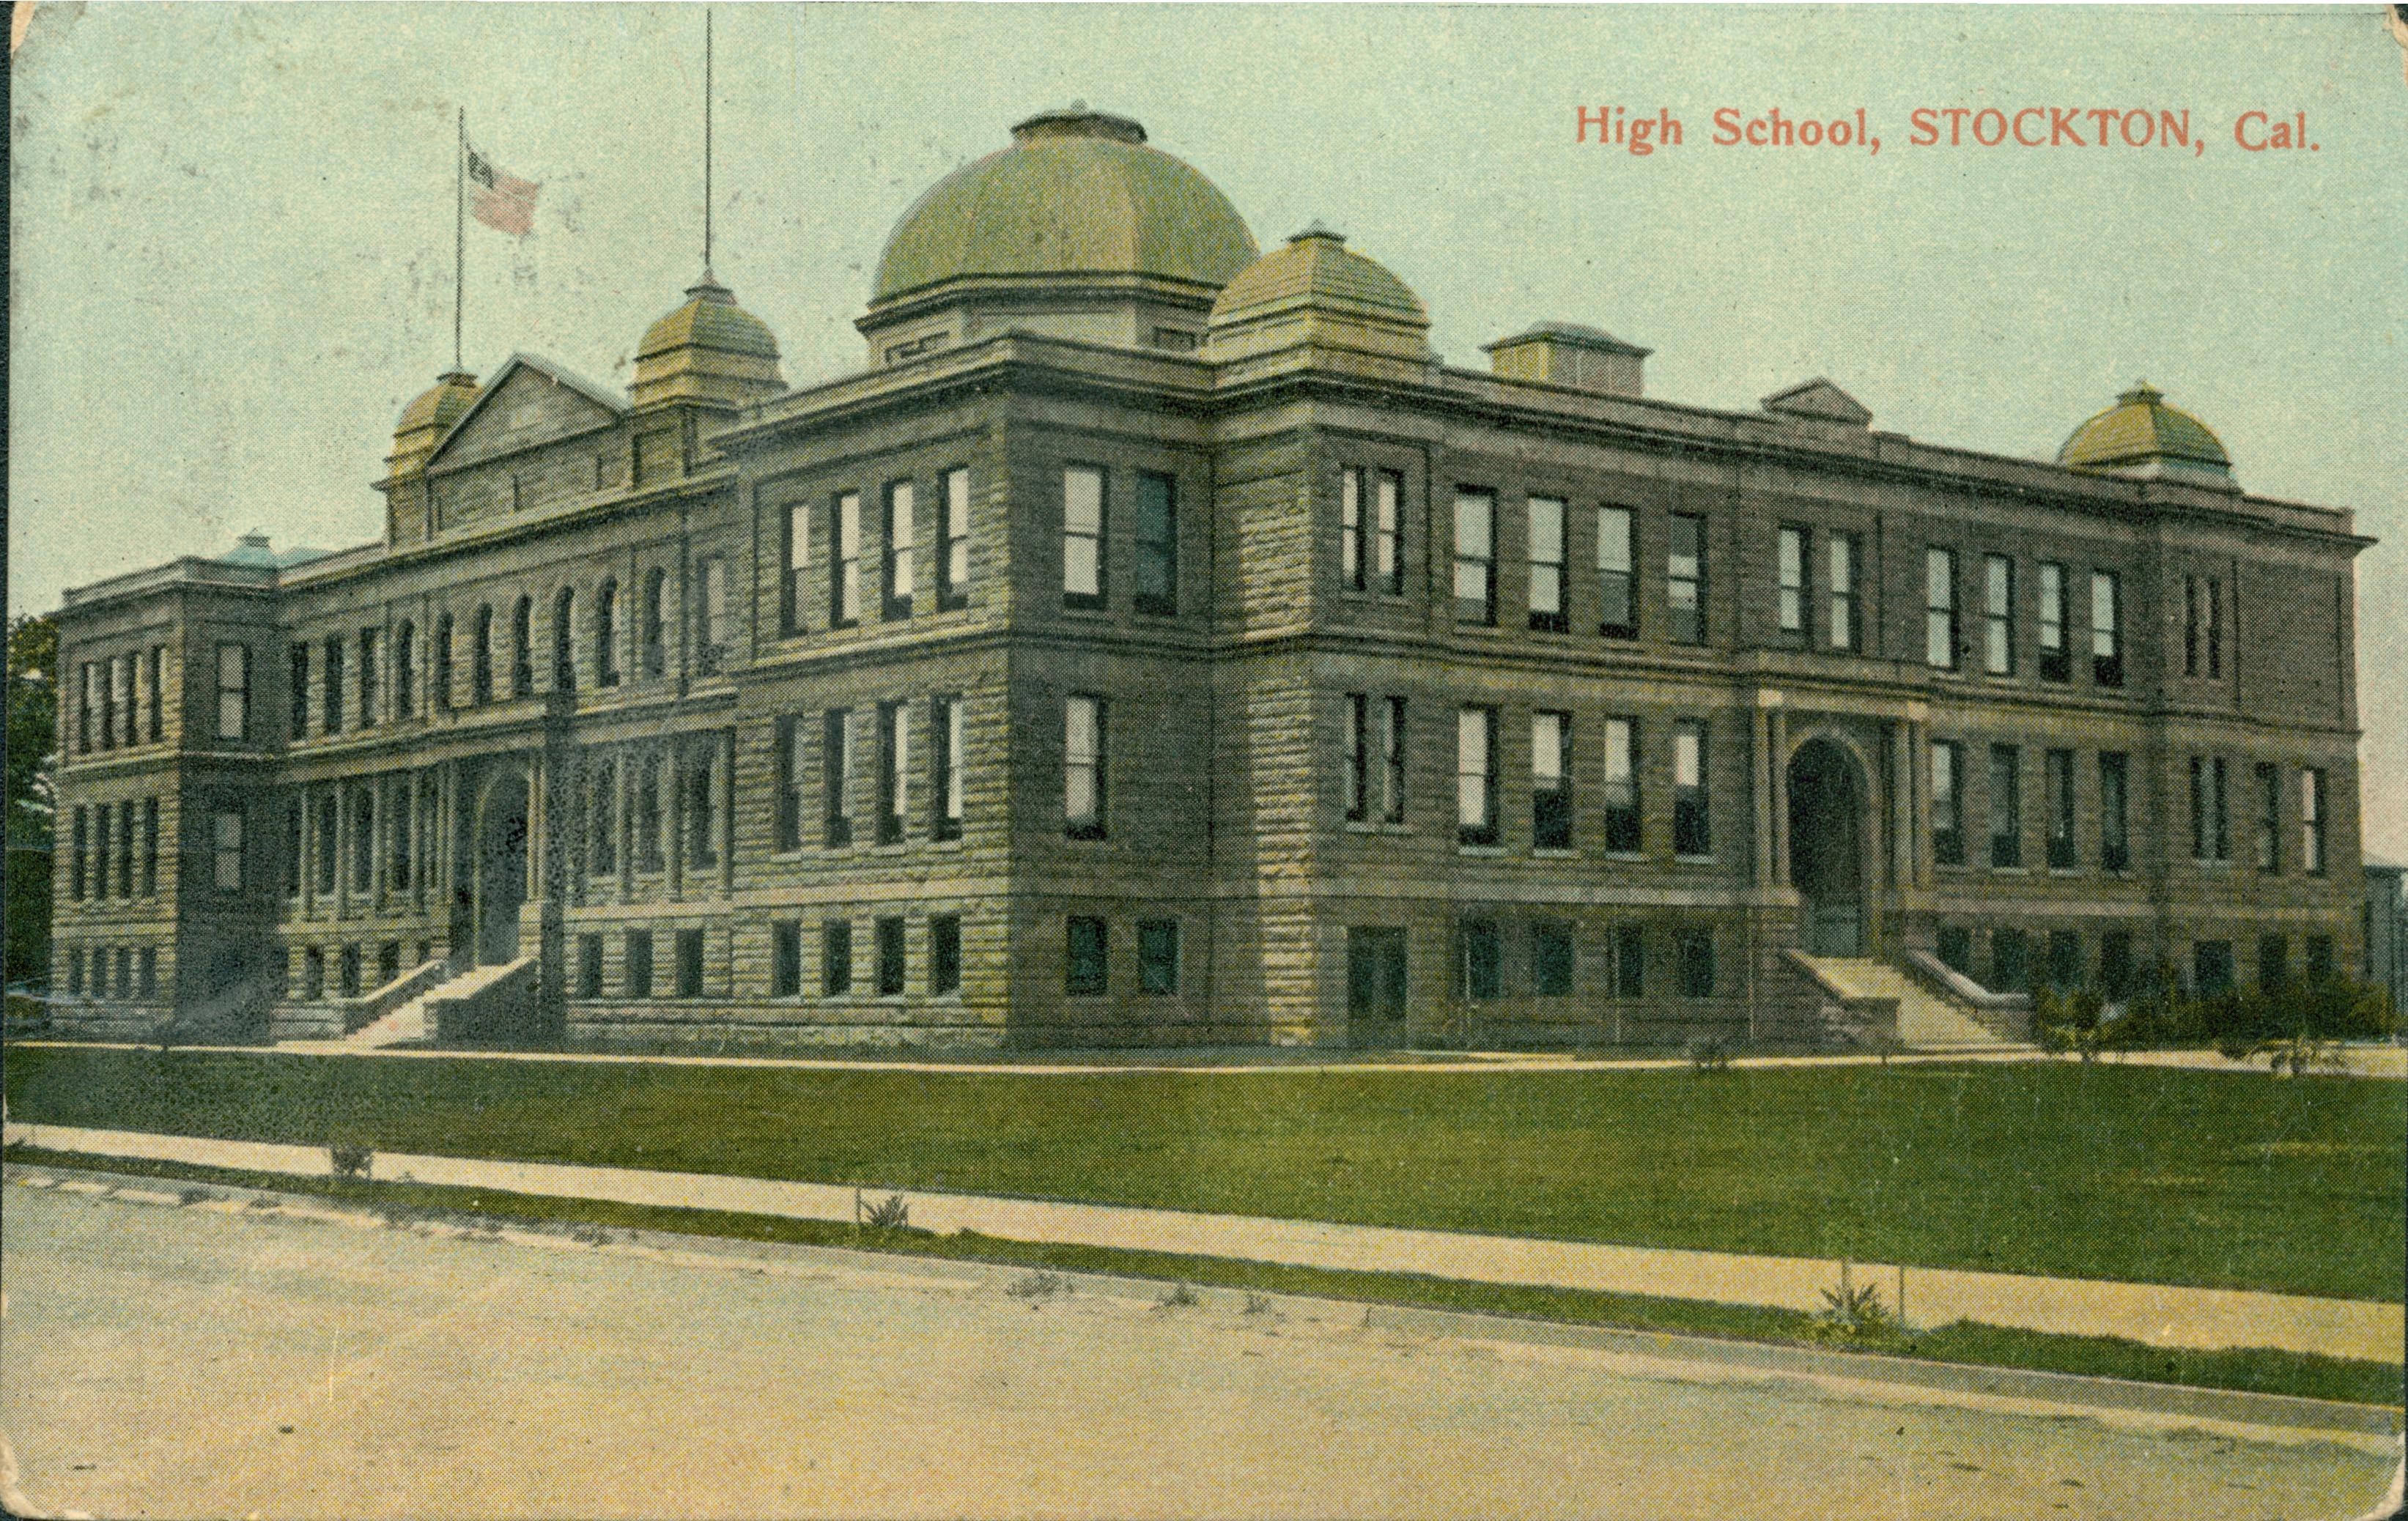 Exterior view of the high school, multi-story building, large grass lawn